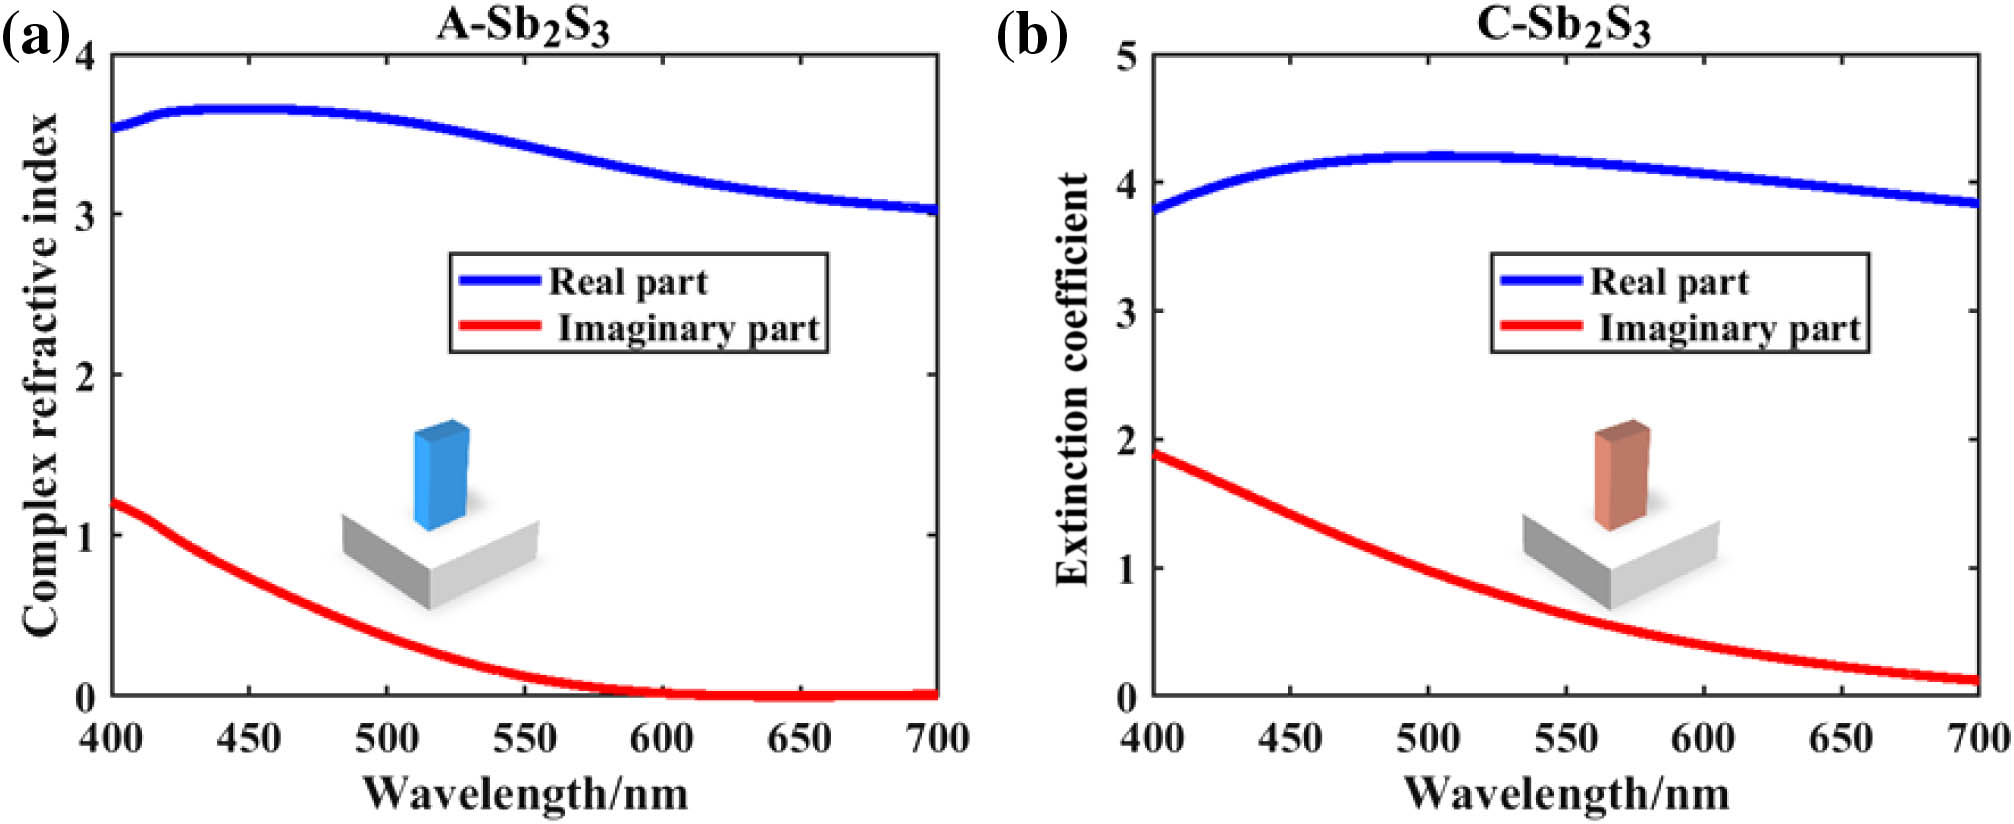 Complex refractive indices, n, and the extinction coefficients, k, of A-Sb2S3 and C-Sb2S3 from 400 to 700 nm.